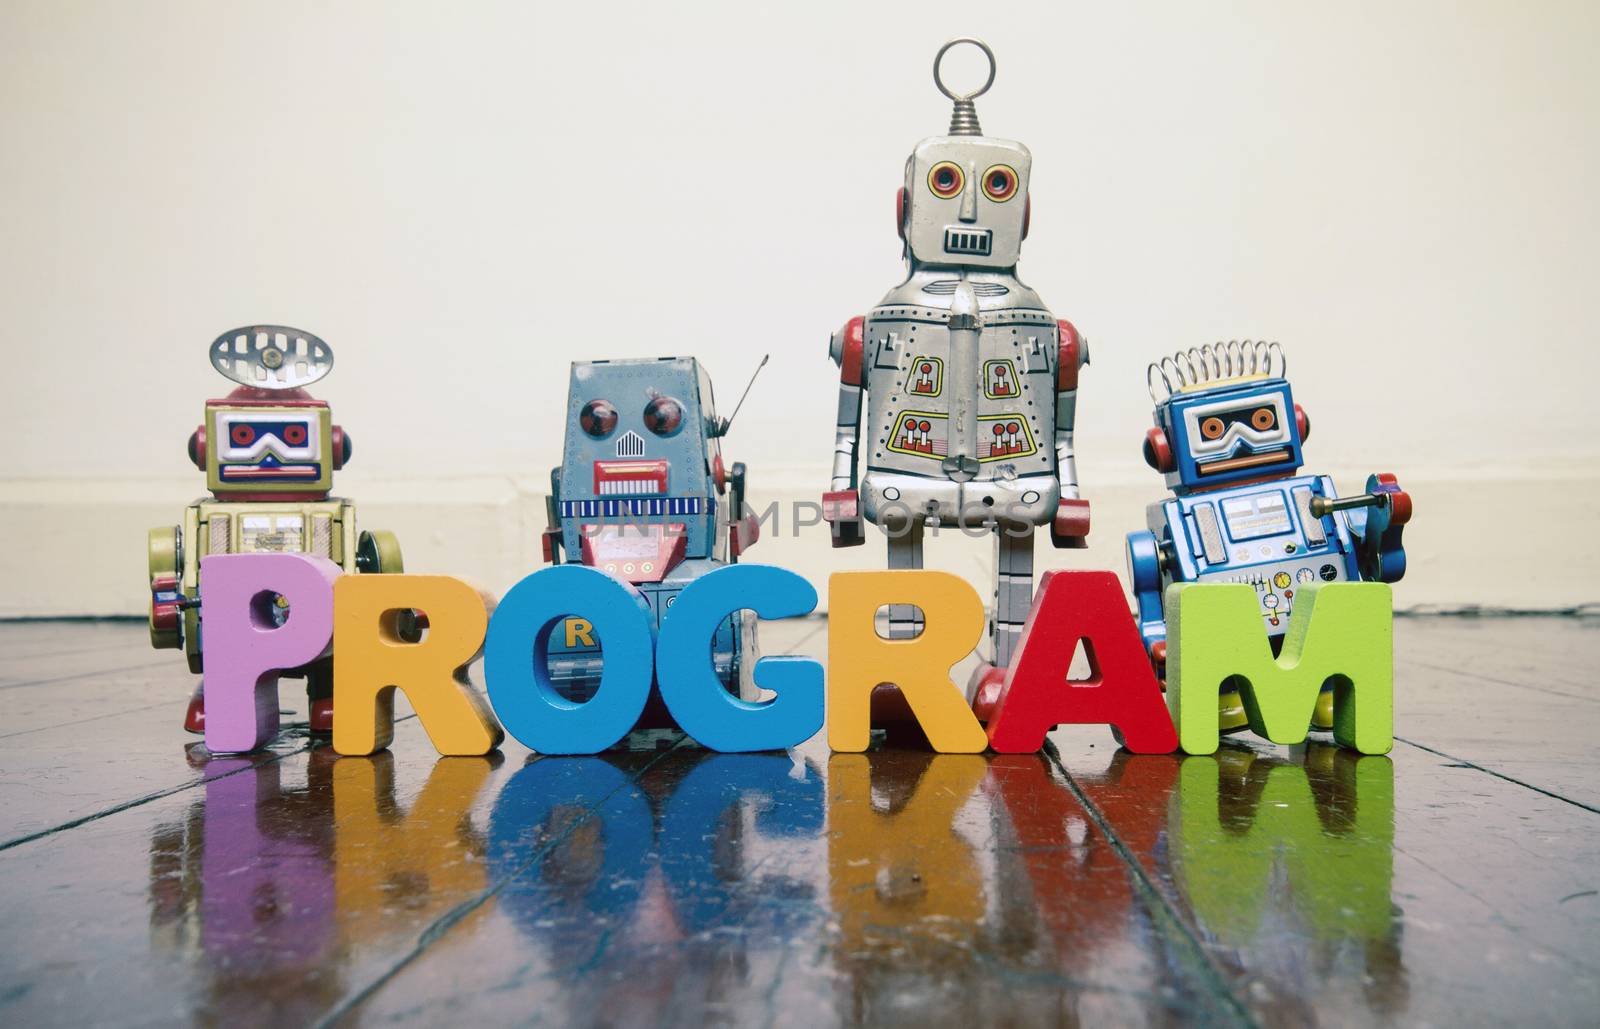 the word PROGRAM with wooden letters and retro toy robots  on an old wooden floor with reflection